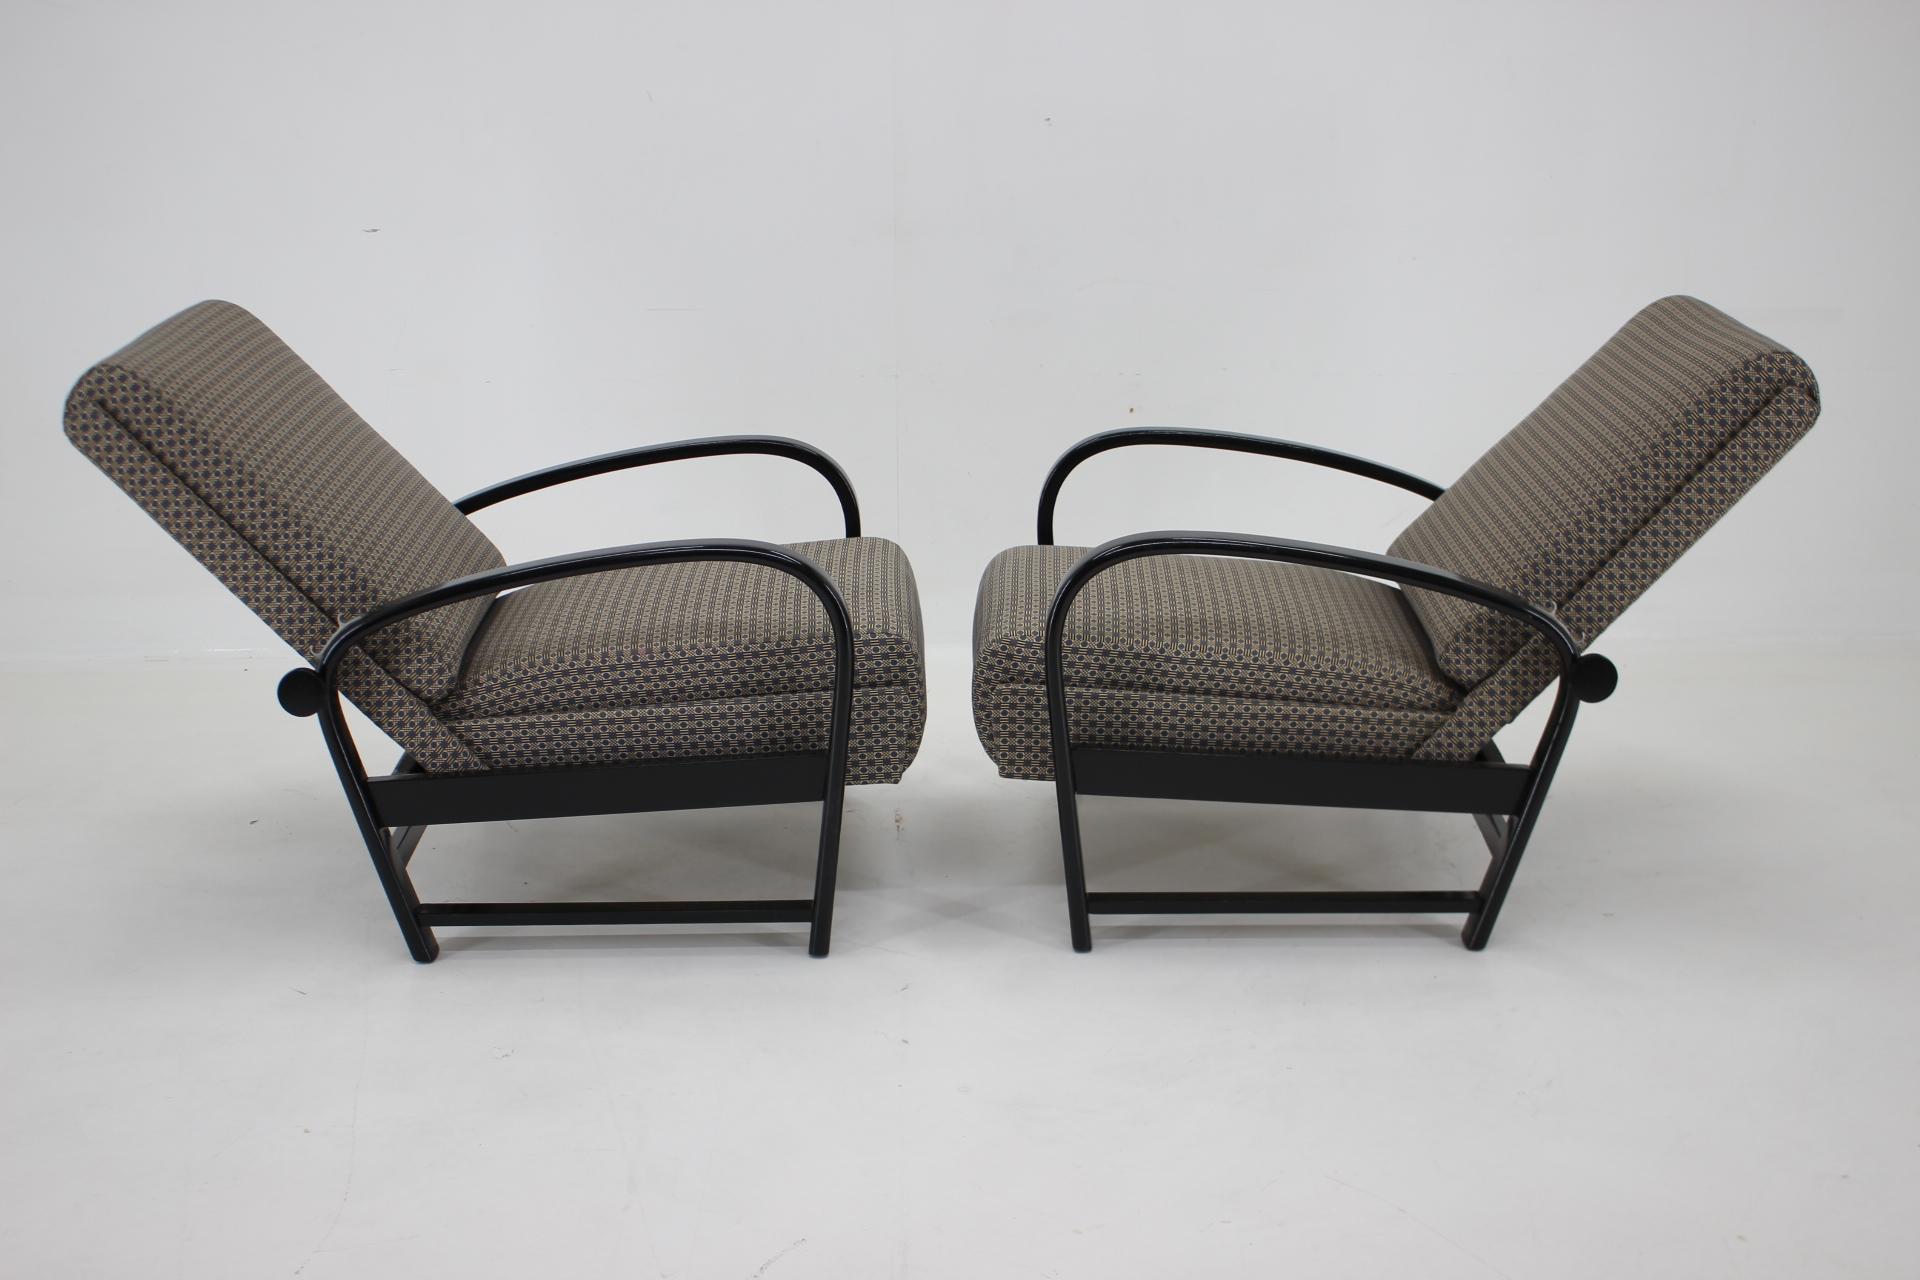 - Newly upholstered
- Newly lacquered wooden parts in black color
- Height of seat 43 cm
- adjustable 82 - 105 cm.